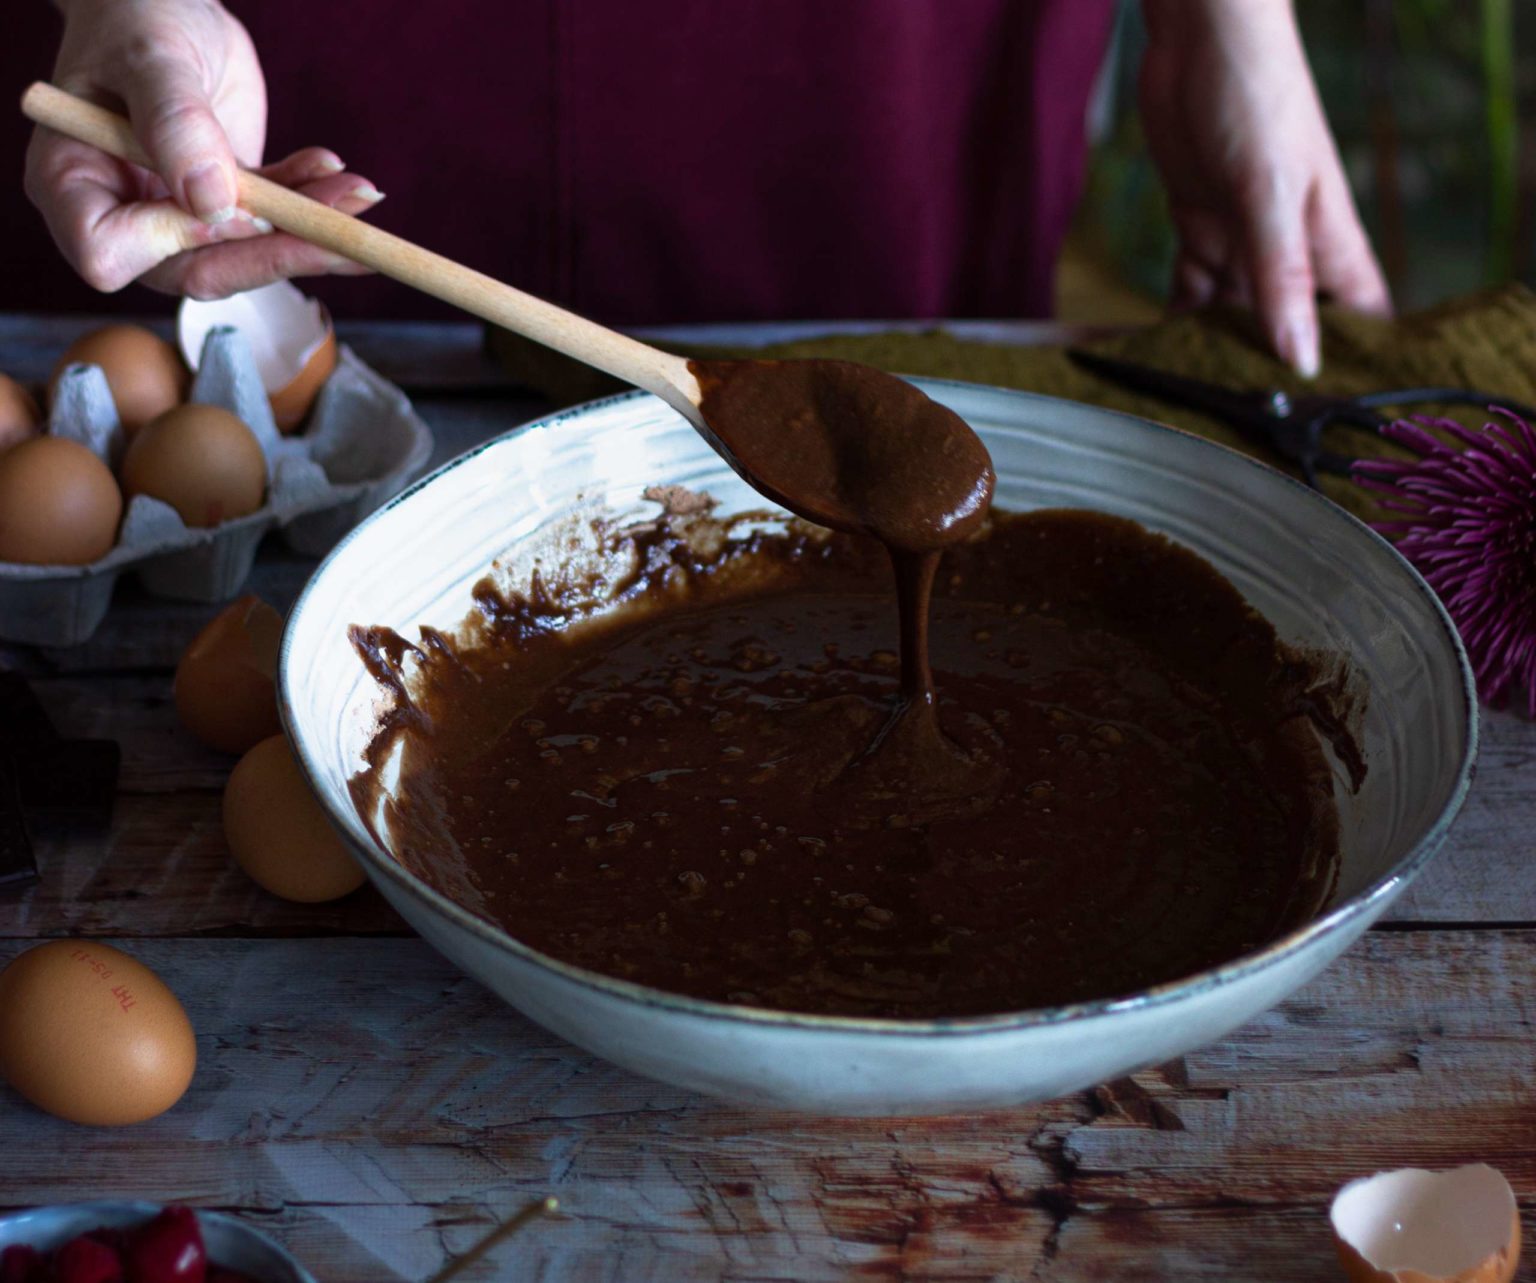 A bowl of melted chocolate with wooden spoon